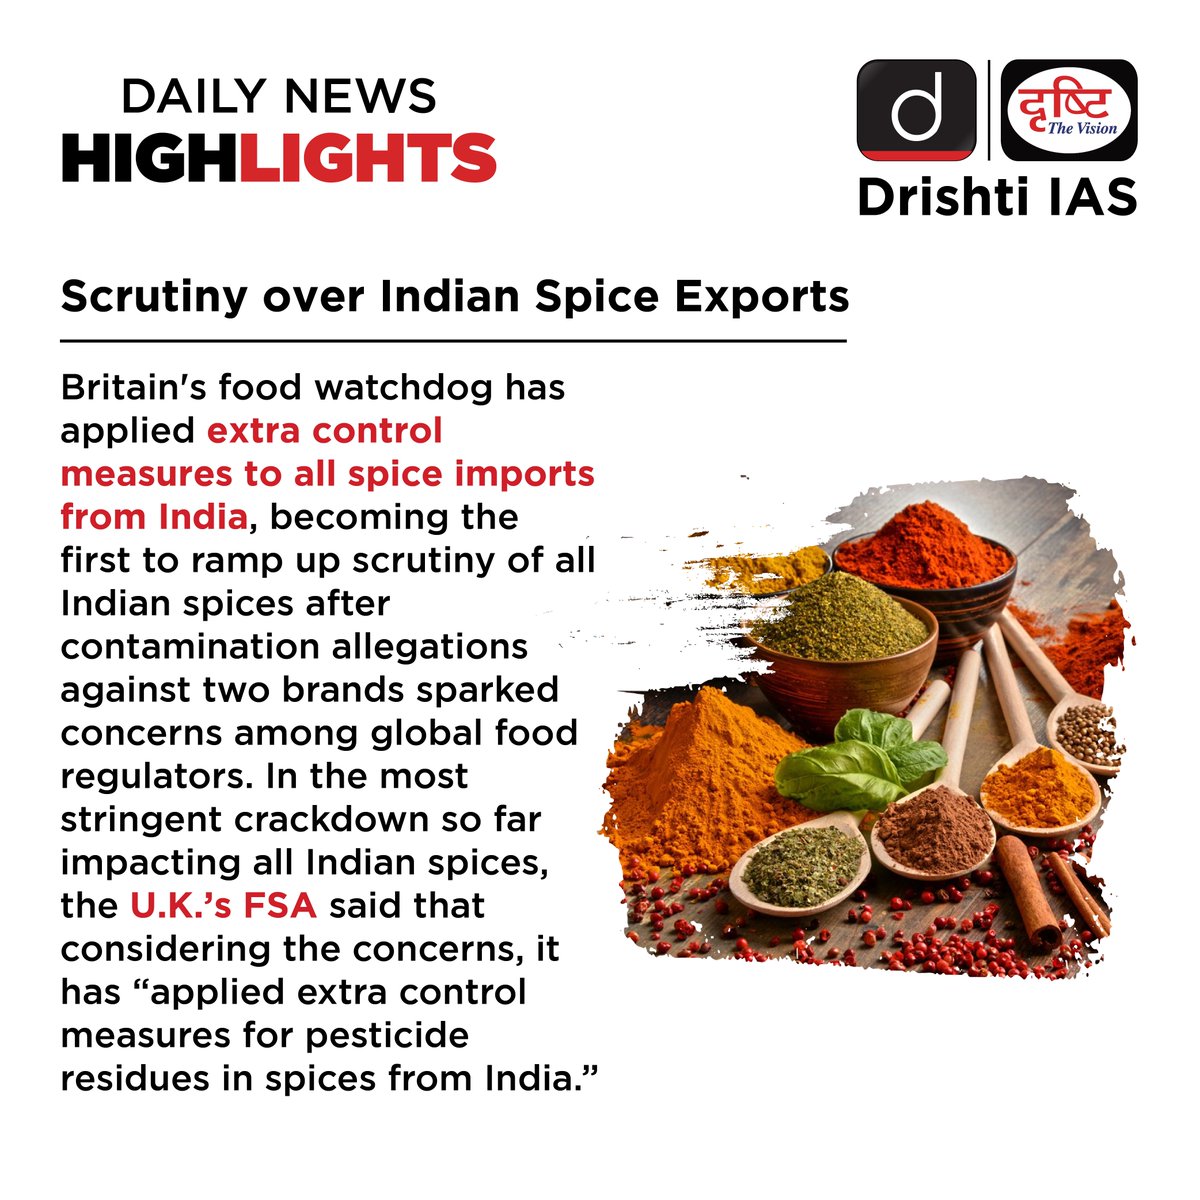 Your daily dose of current affairs for UPSC 2024 Prelims with #DrishtiDailyNewsHighlights. #PrelimsSuccessWithDrishtiIAS #PrelimsWithDrishtiIAS #Prelims2024 #Trade #Digital #Summit #Spice #Export #India #UPSC #GeneralStudies #UPSCAspirants #DrishtiIAS #DrishtiIASEnglish